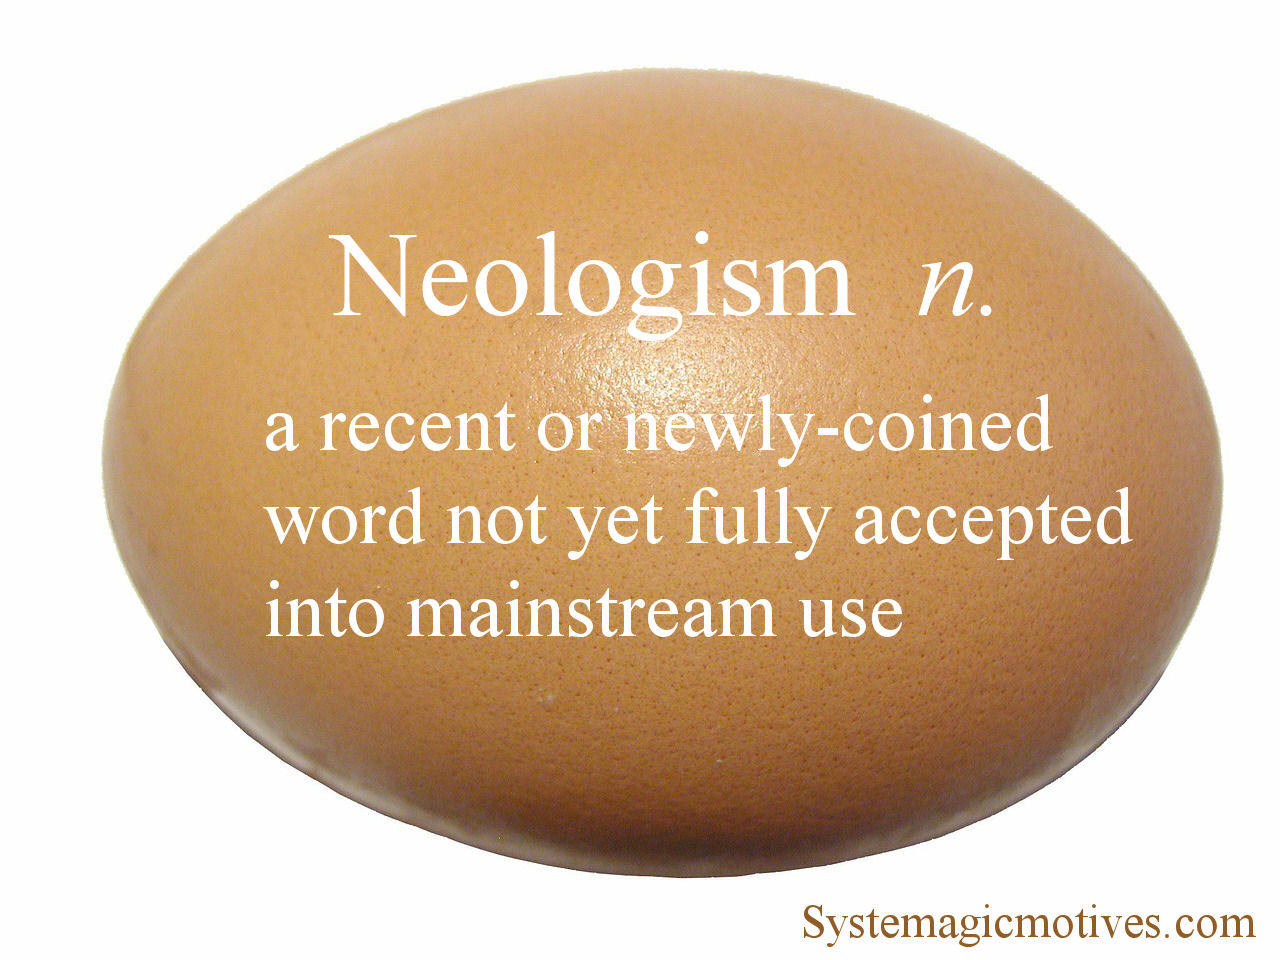 Graphic Definition of Neologism